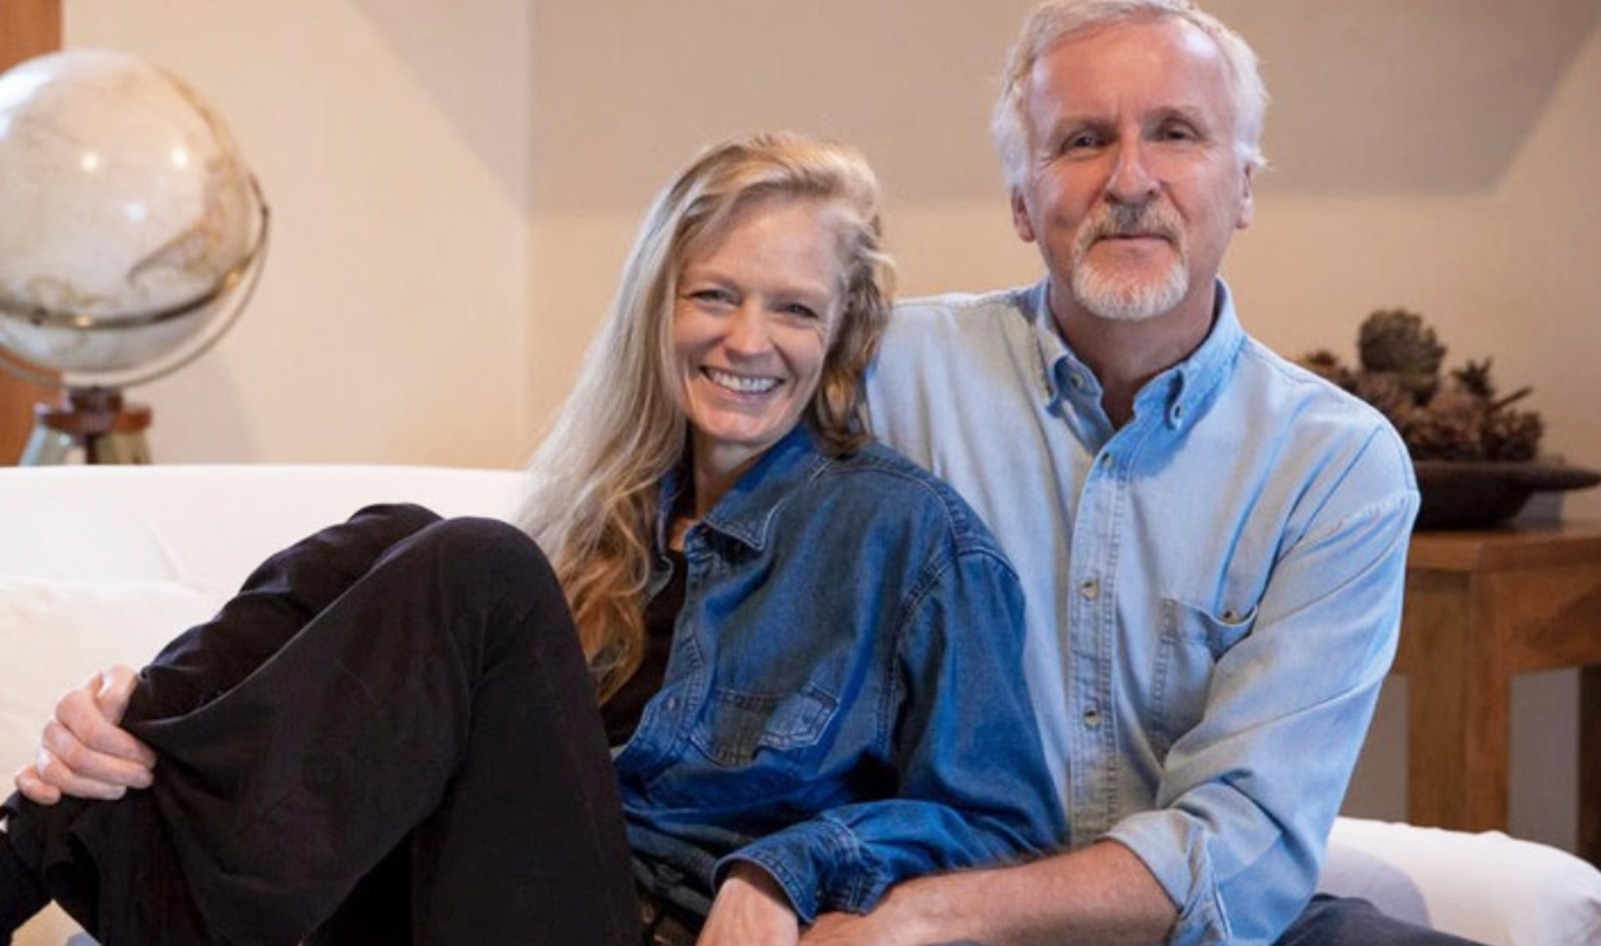 Suzy and James Cameron's Vegan K-12 Muse School Is Now Offering Virtual Learning in All 50 States